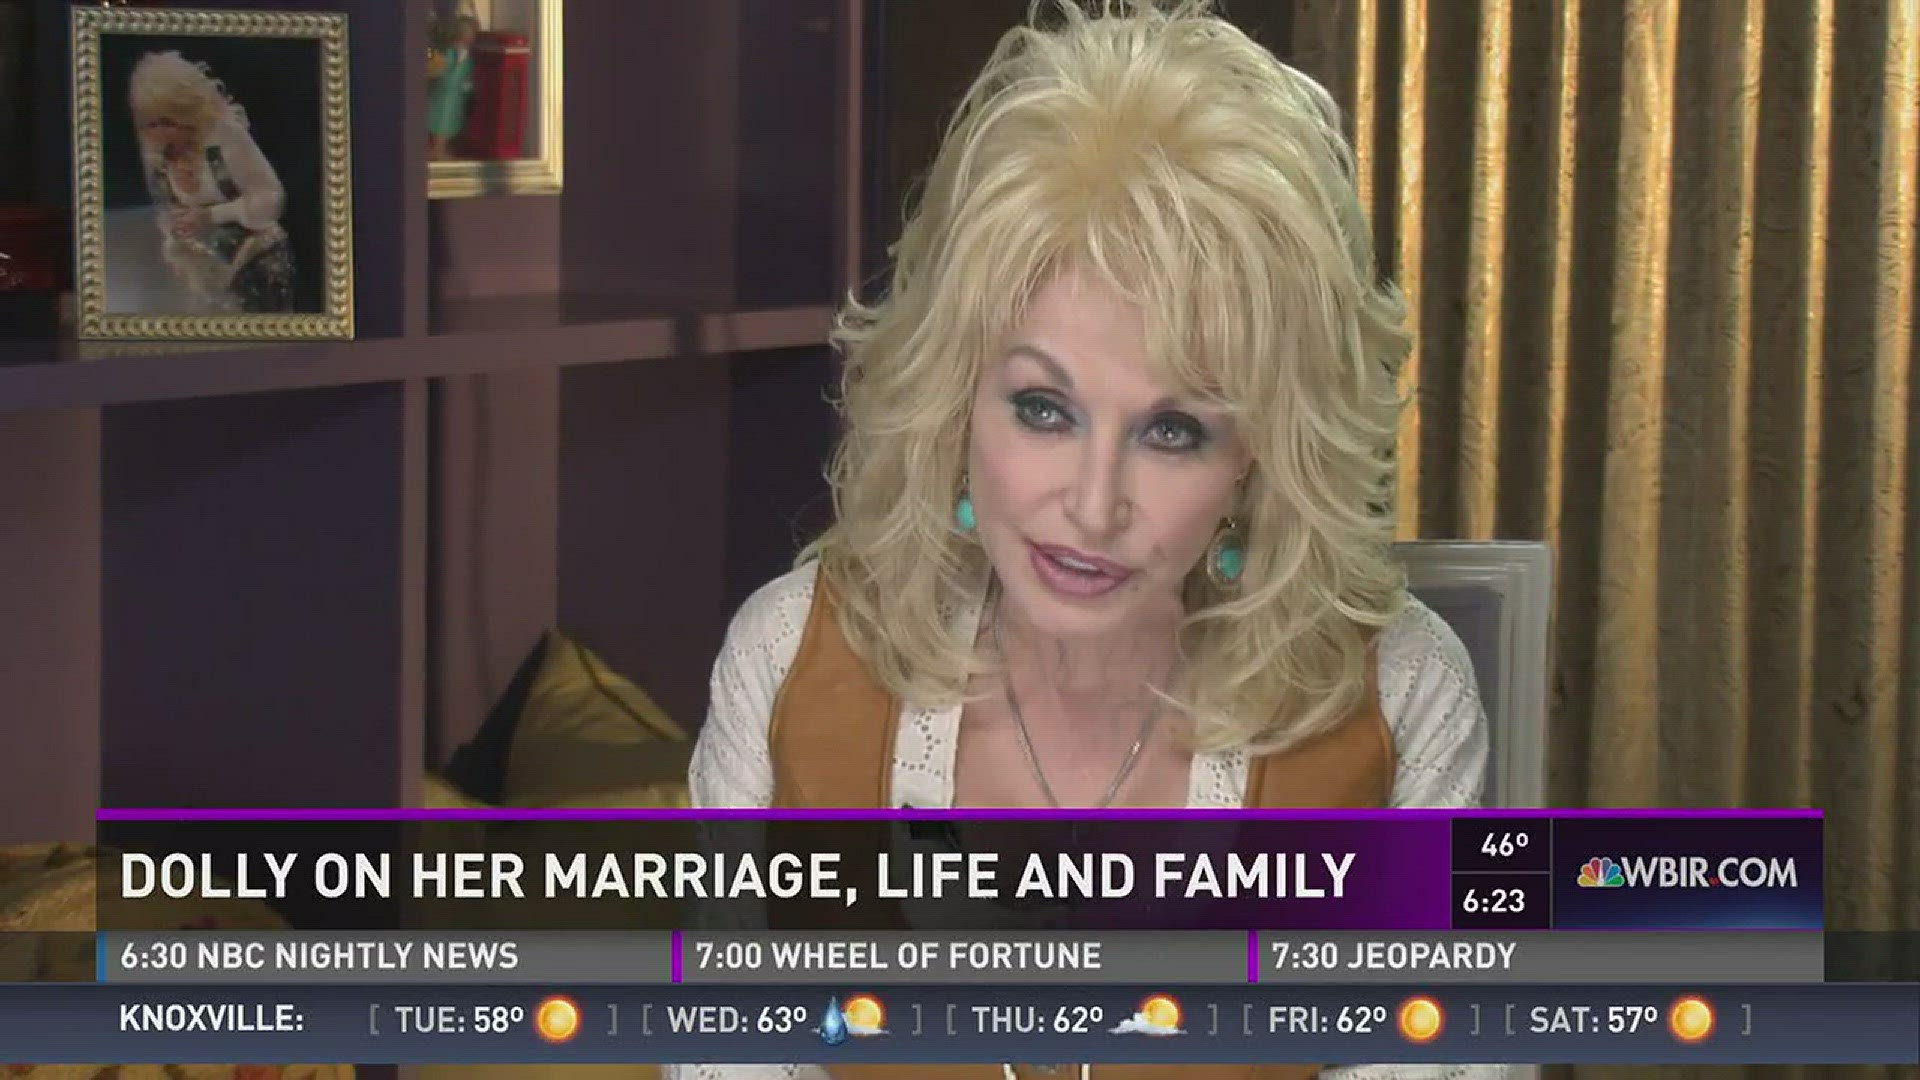 Nov. 21, 2016: Dolly Parton will be back in East Tennessee for the premier of her new movie "Christmas of Many Colors" at Dollywood. The country superstar talks with 10News about life and her continued success.